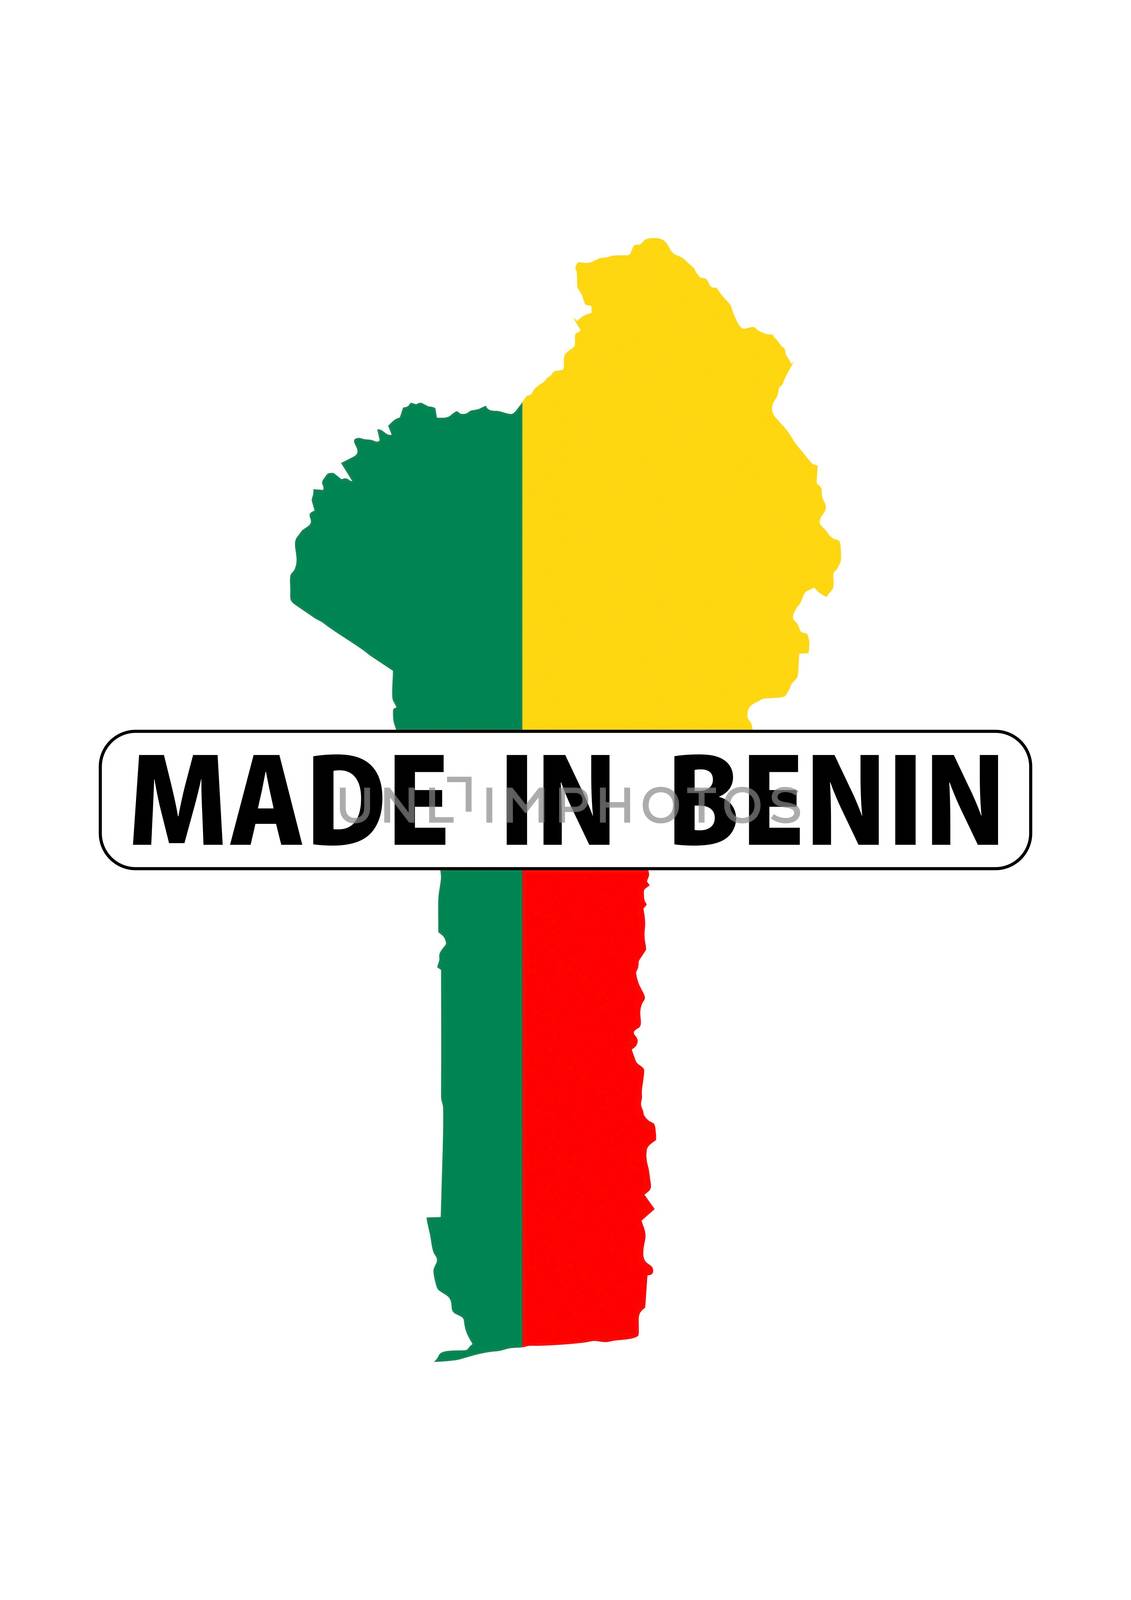 made in benin country national flag map shape with text